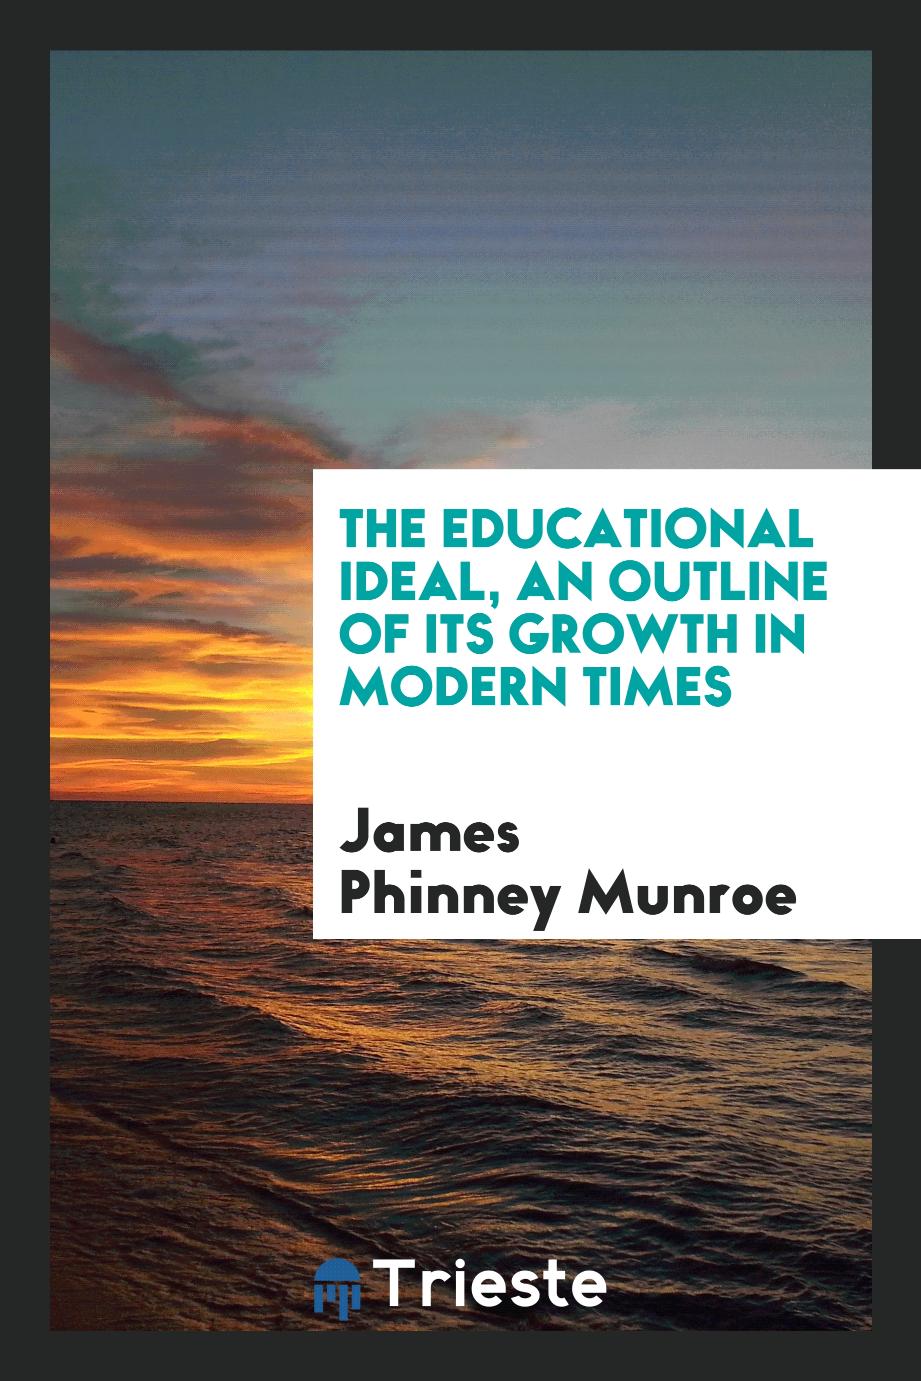 The educational ideal, an outline of its growth in modern times